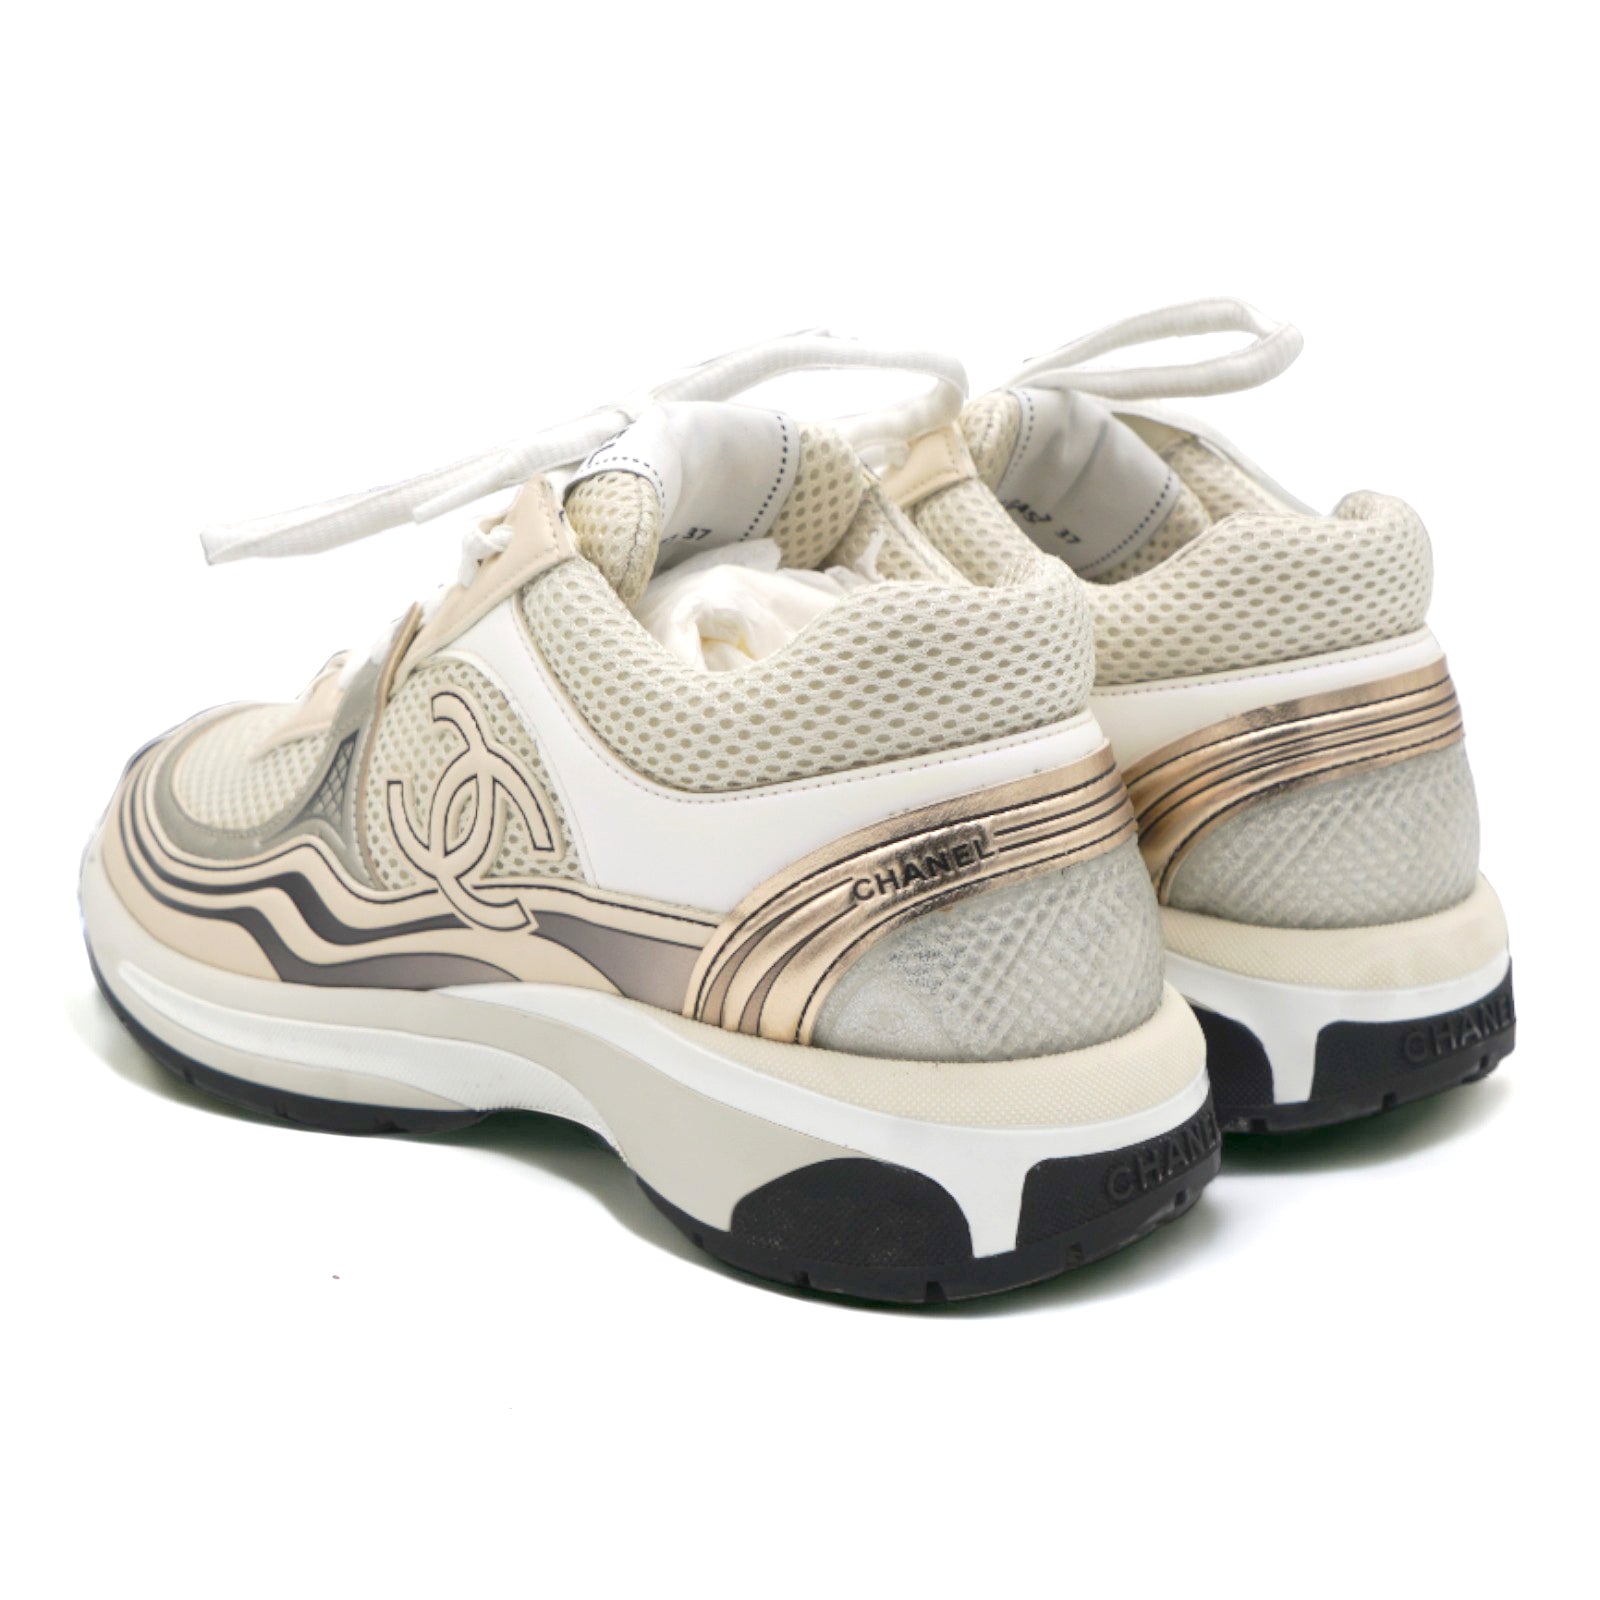 SASOM  shoes Chanel Sneakers Fabric Laminated & White Silver (W) Check the  latest price now!